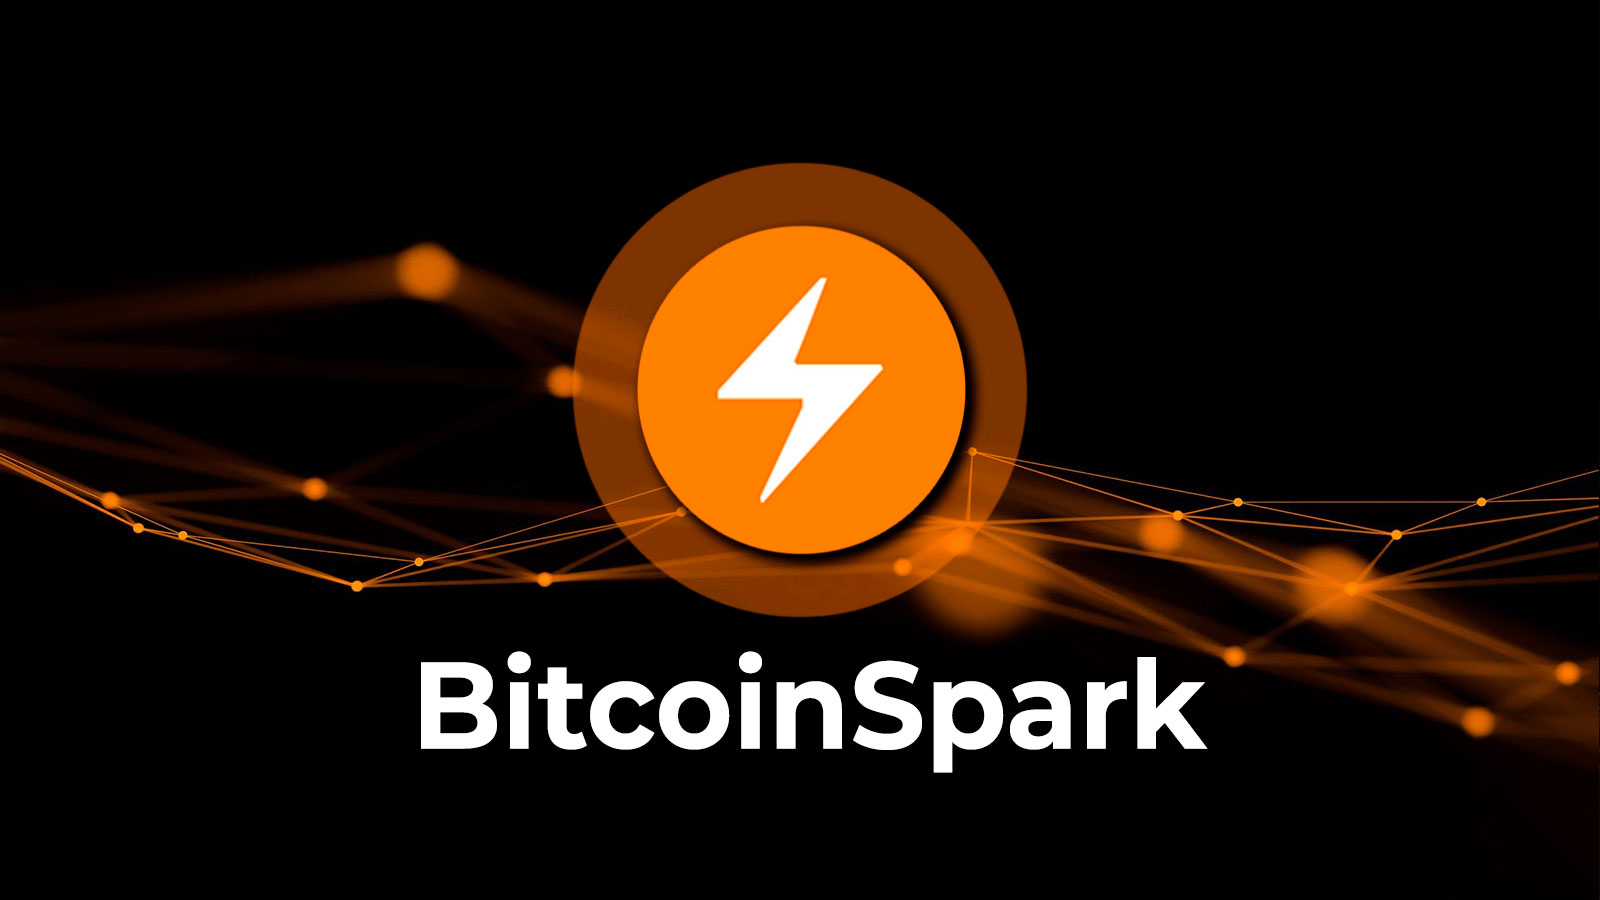 Forget Dogecoin, Find Unbelievable Prospects With New Projects Like Bitcoin Spark